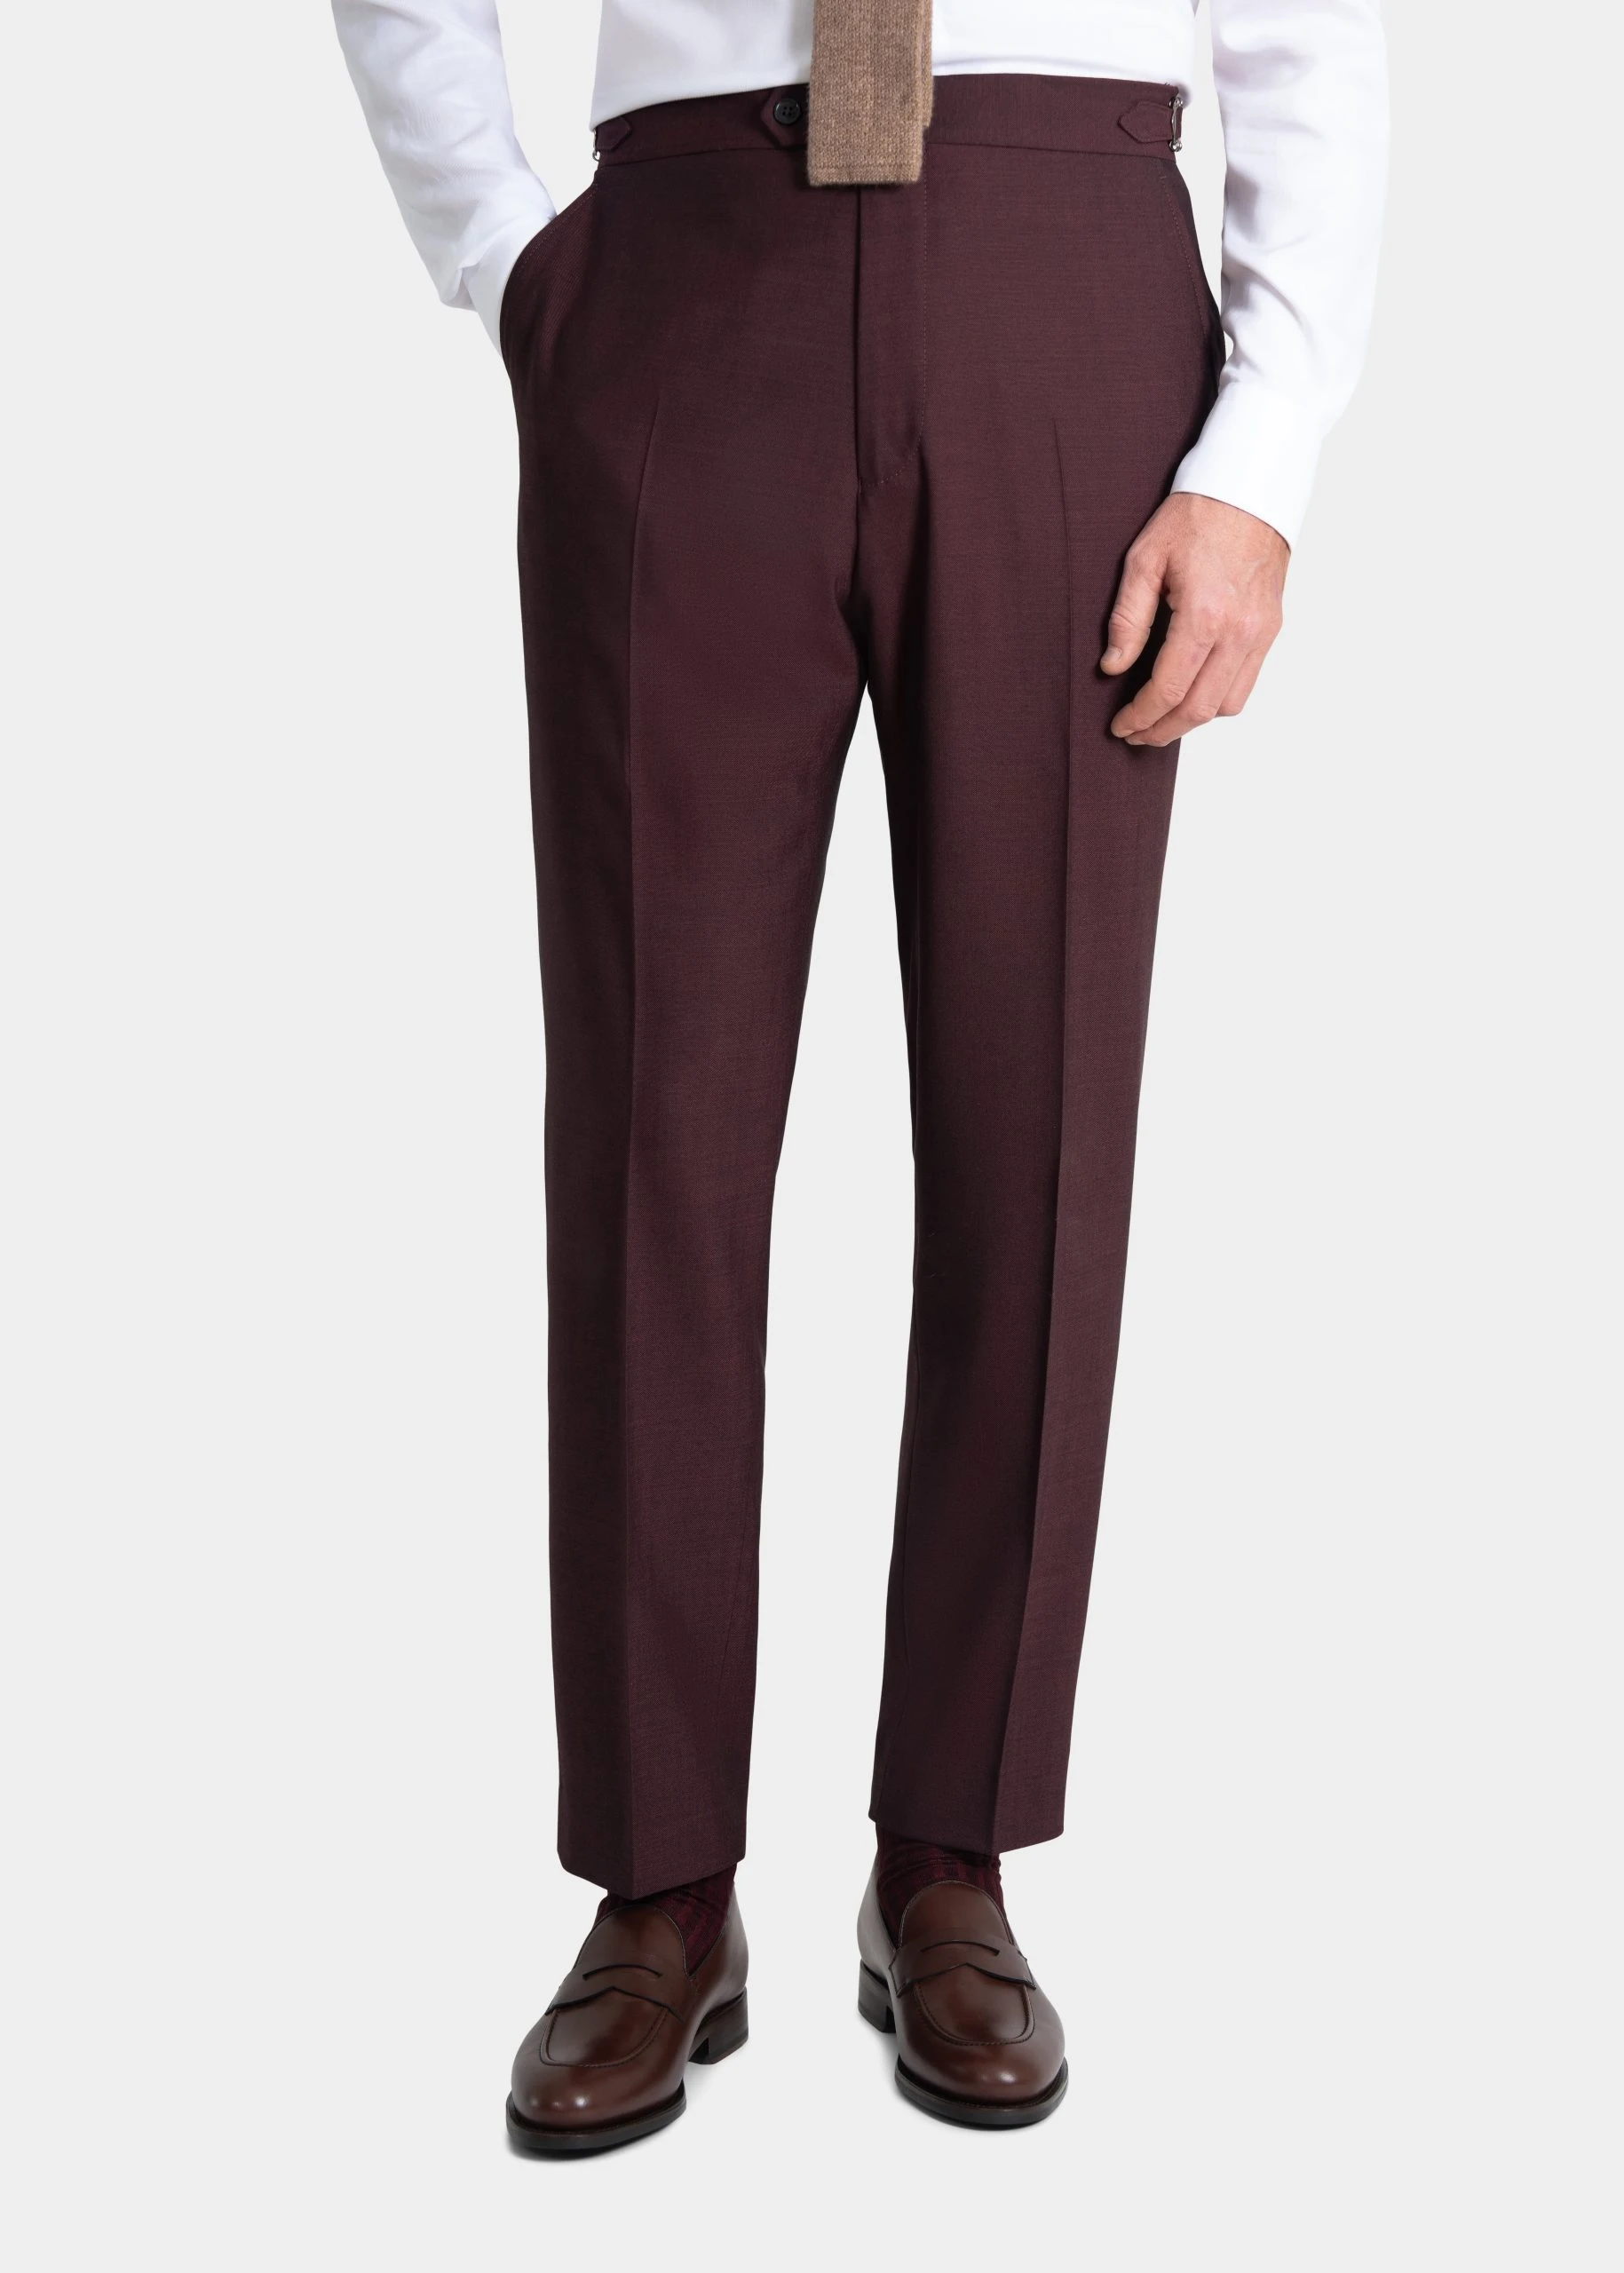 burgundy suit trousers in twistair fabric